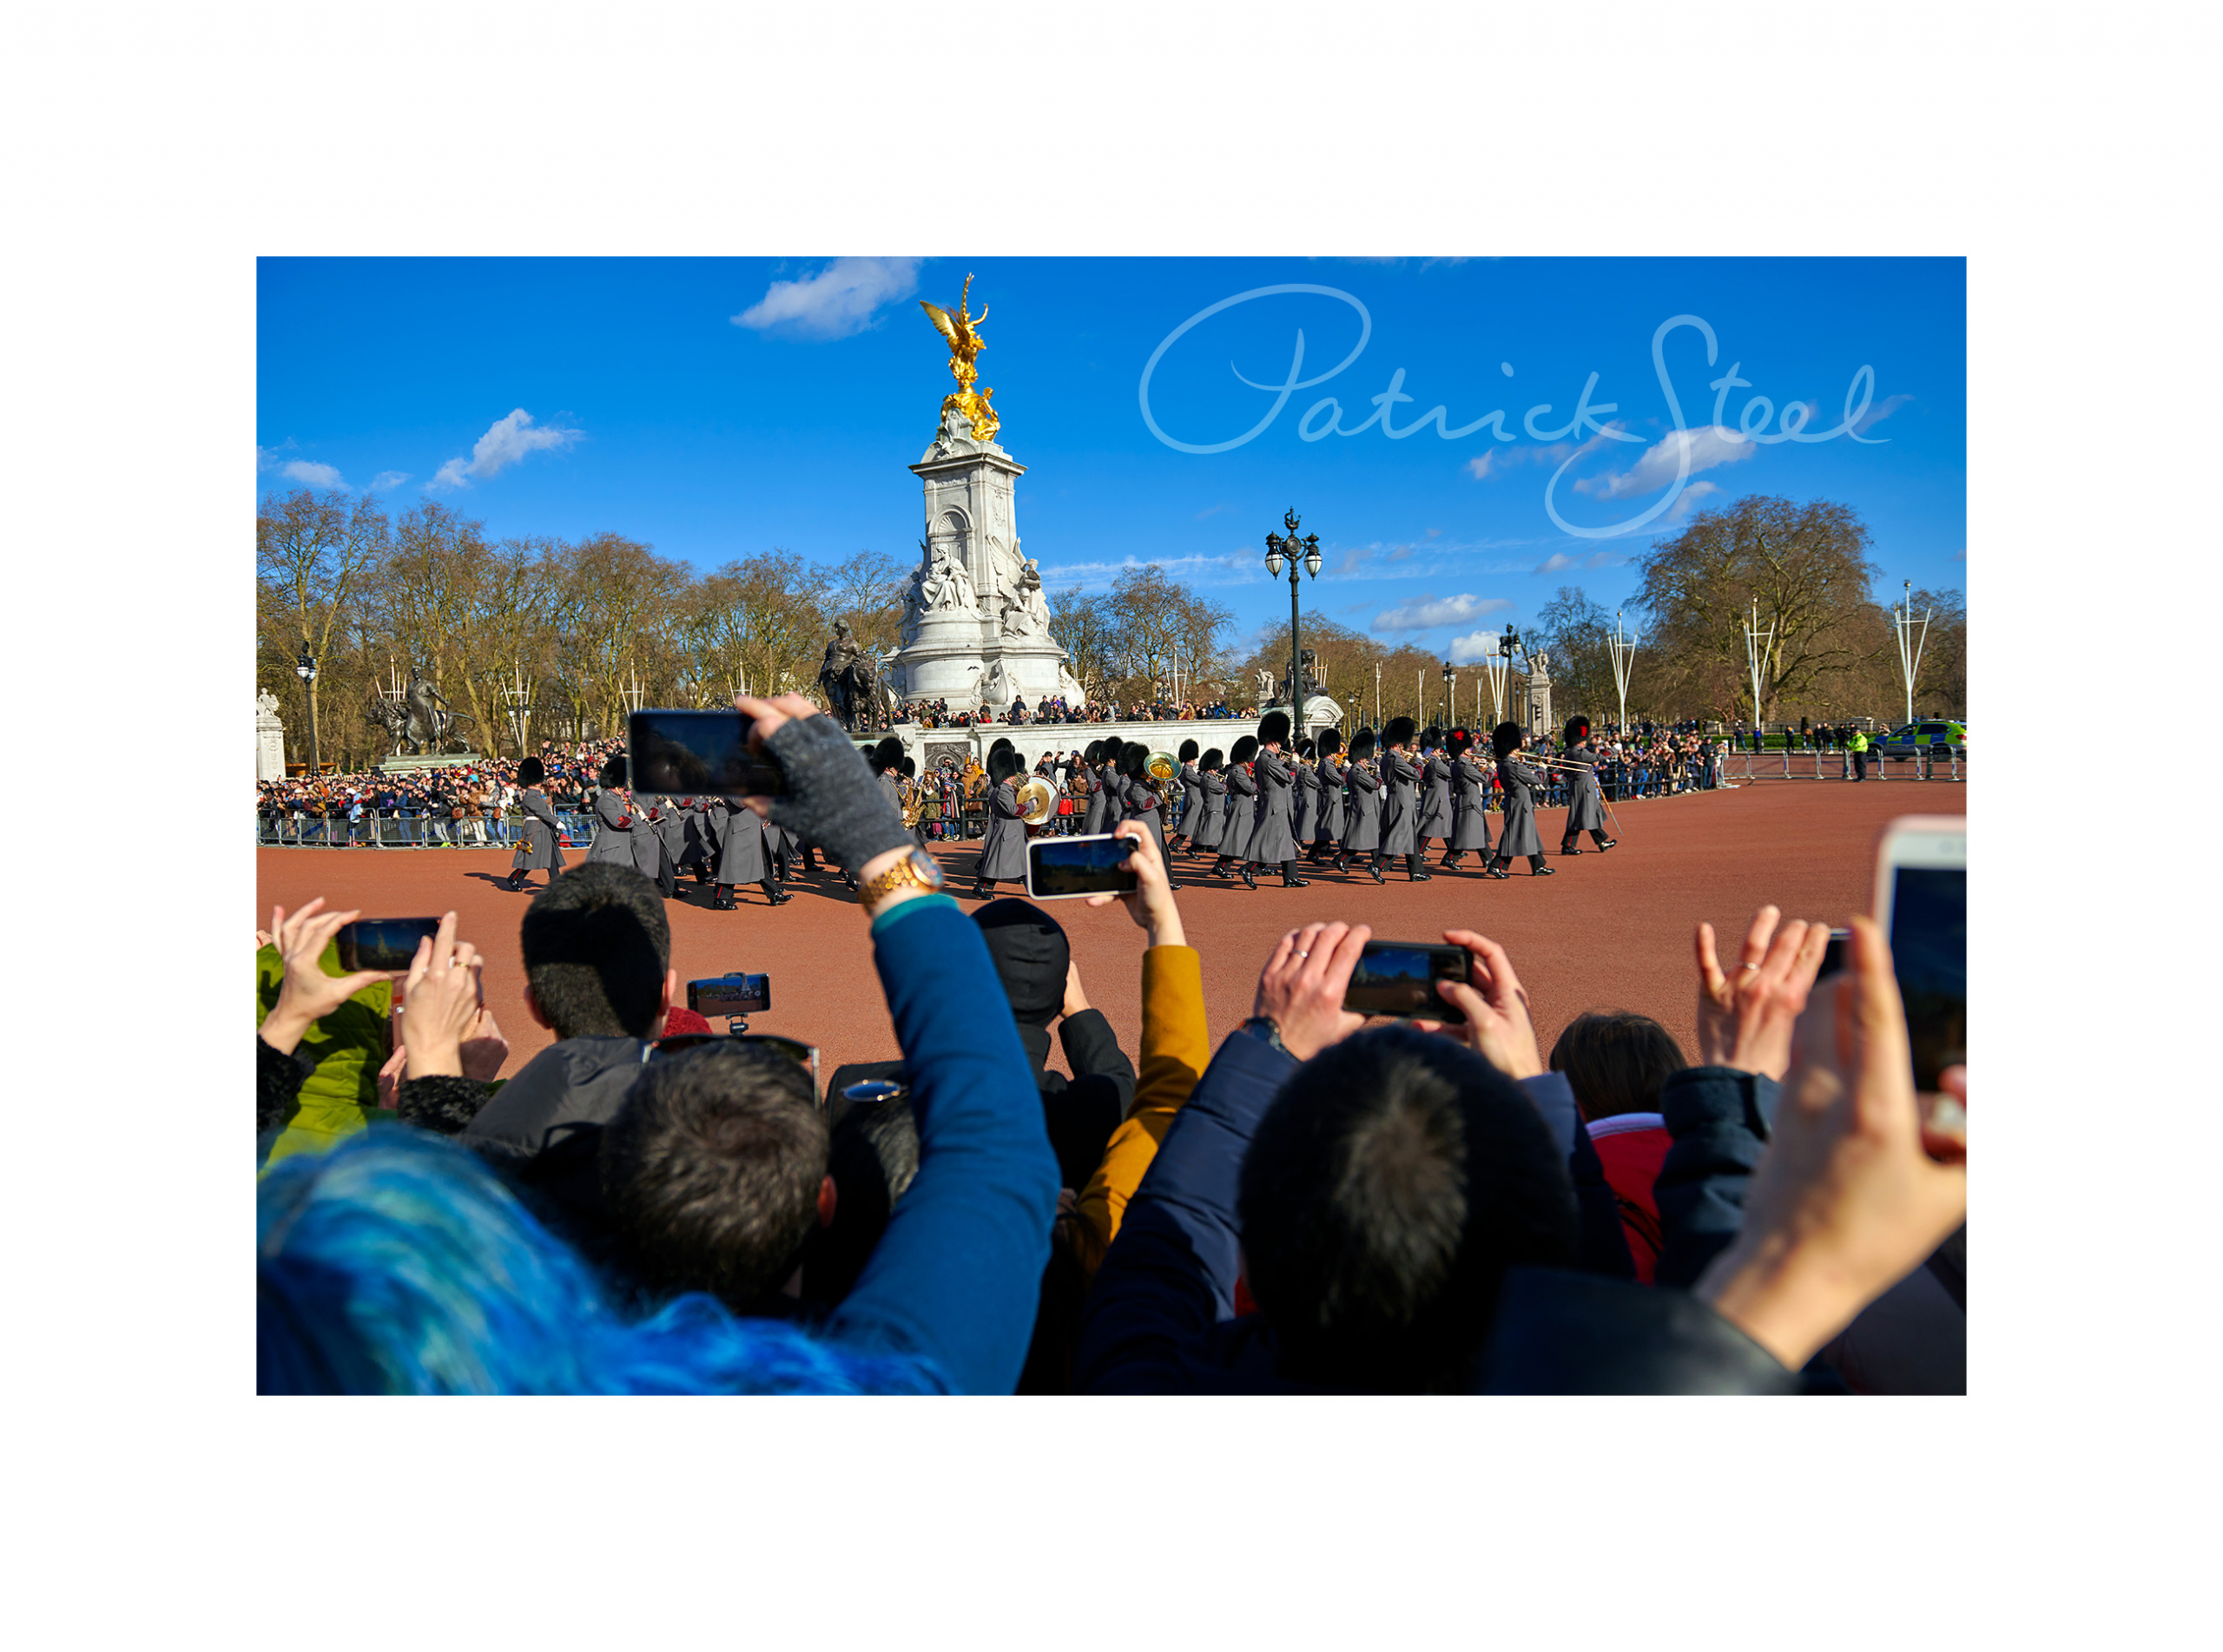 limited edition photograph of the band of the coldstream guards victoria memorial london by photographer patrick steel